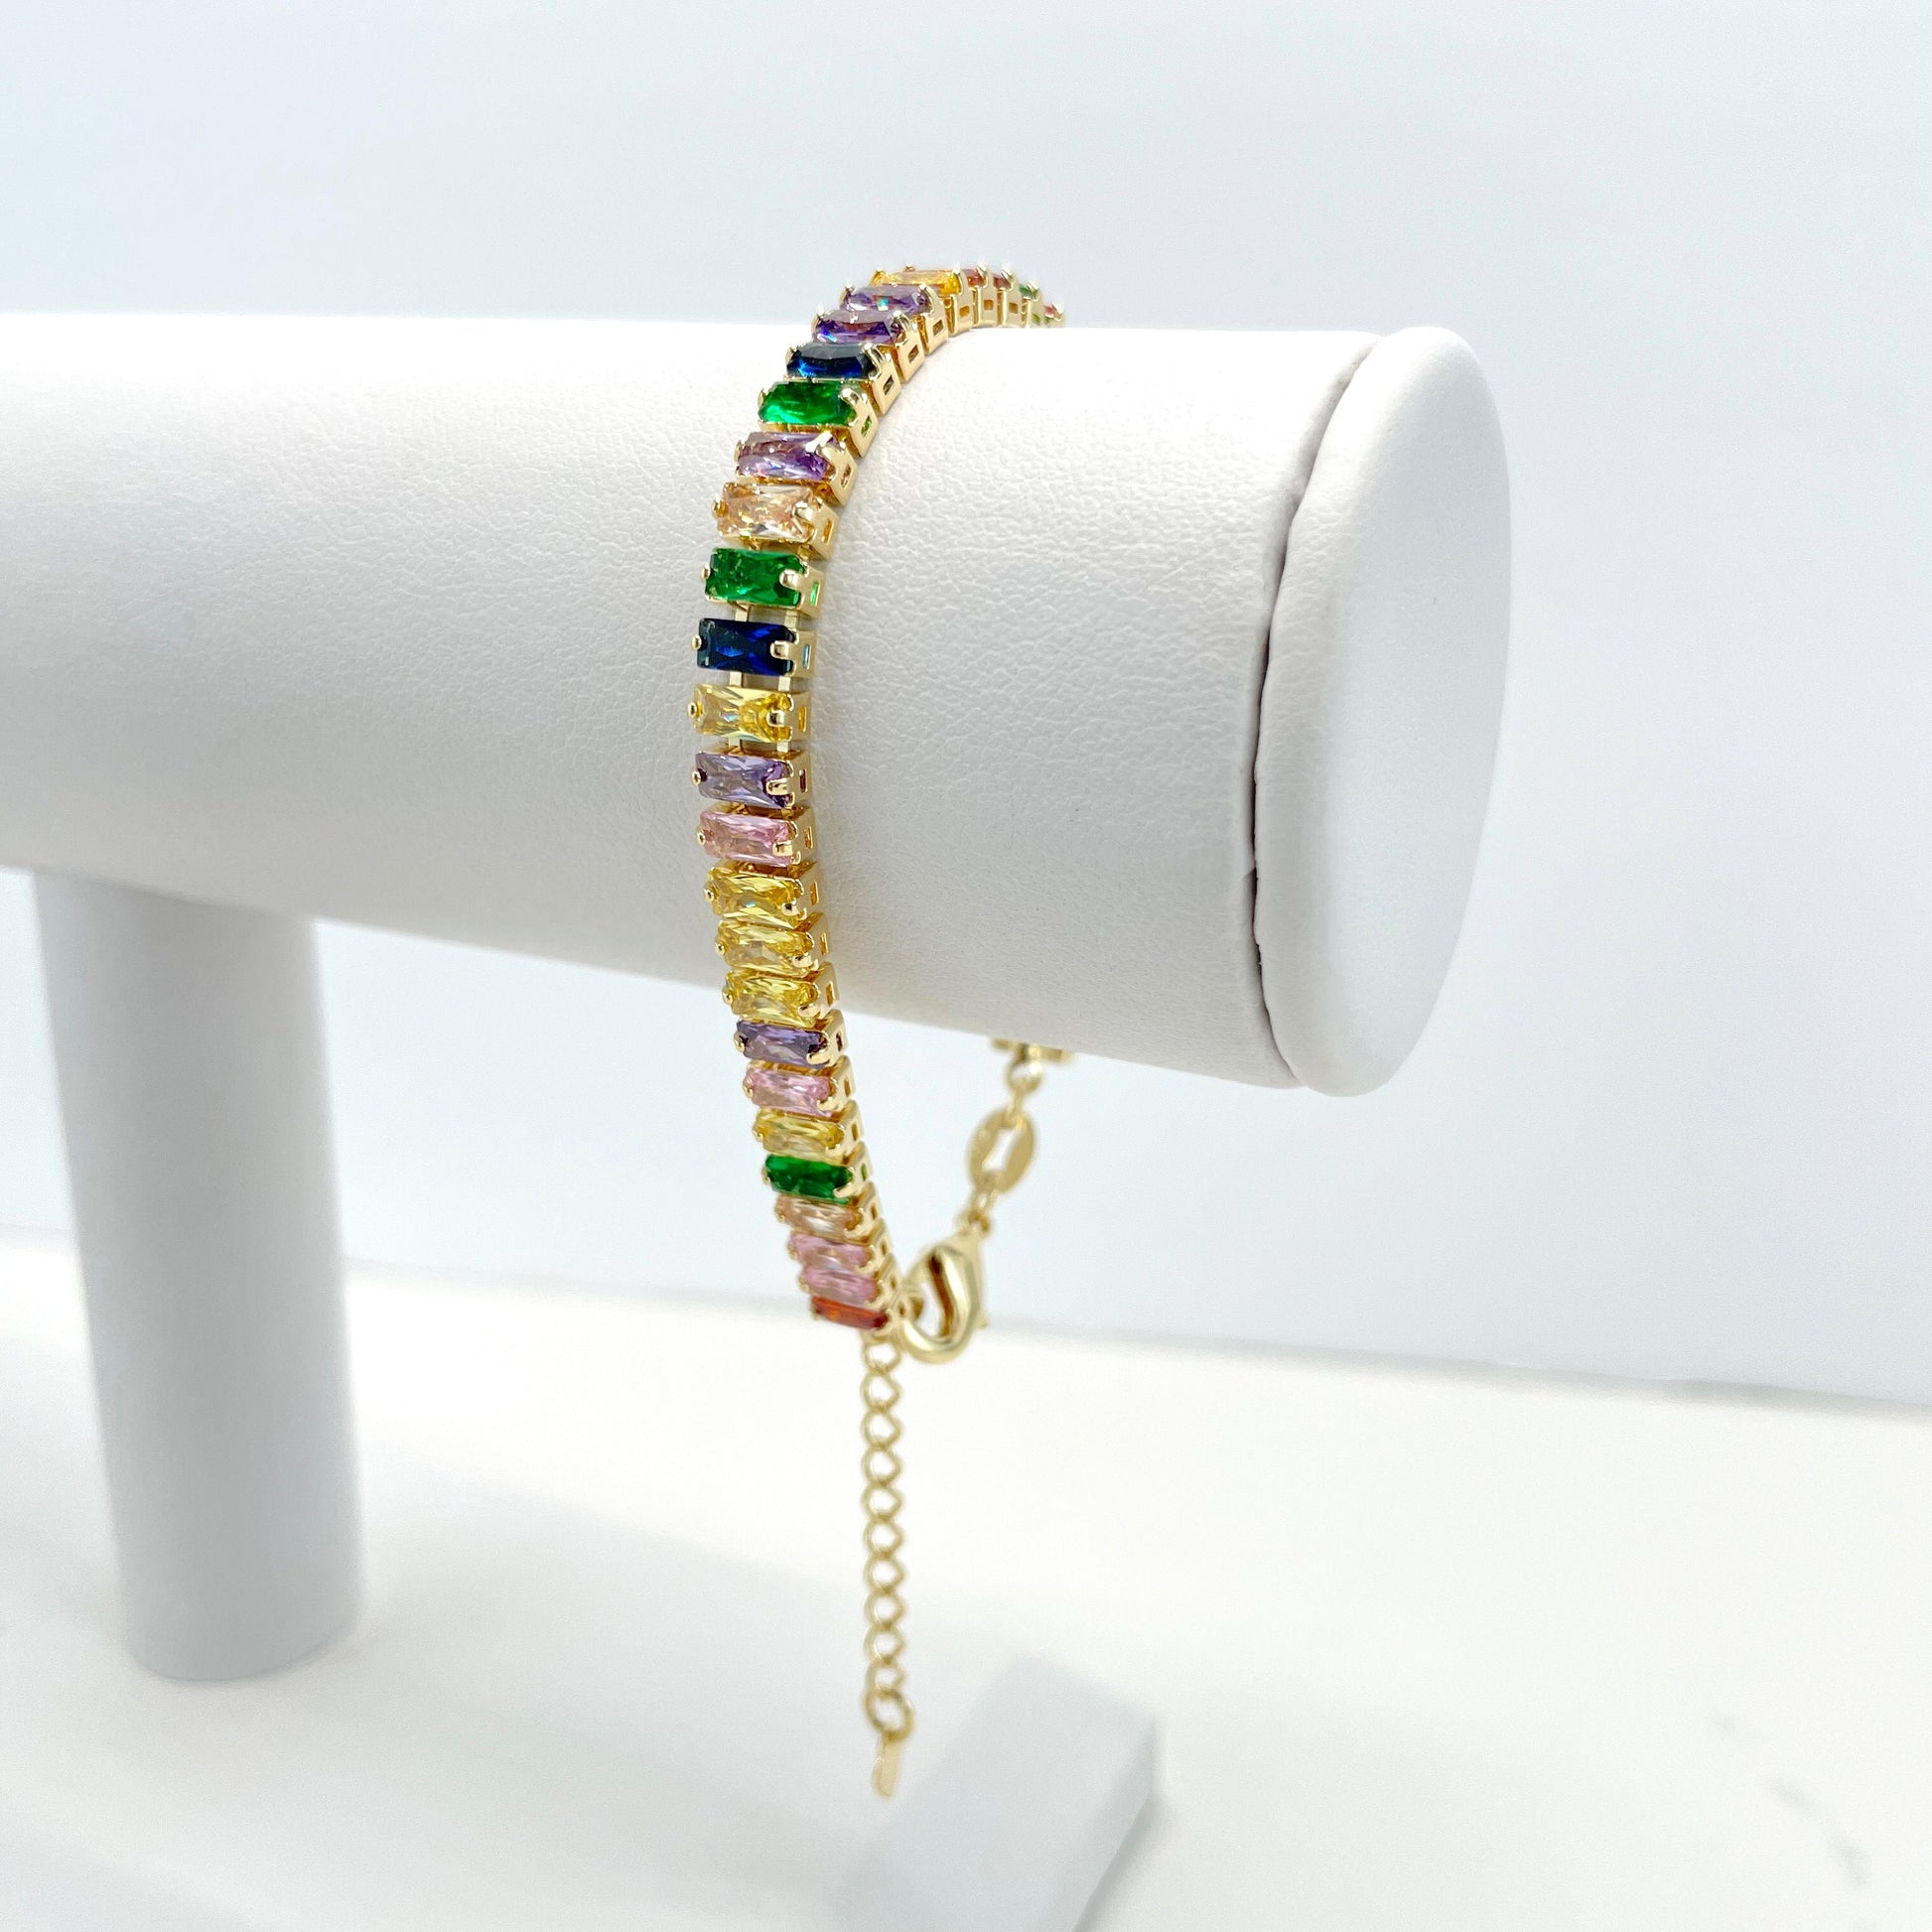 18k Gold Filled Fancy Rainbow Choker or Bracelet Featuring High Quality Colorful Cubic Zirconia Wholesale Jewelry Supplies